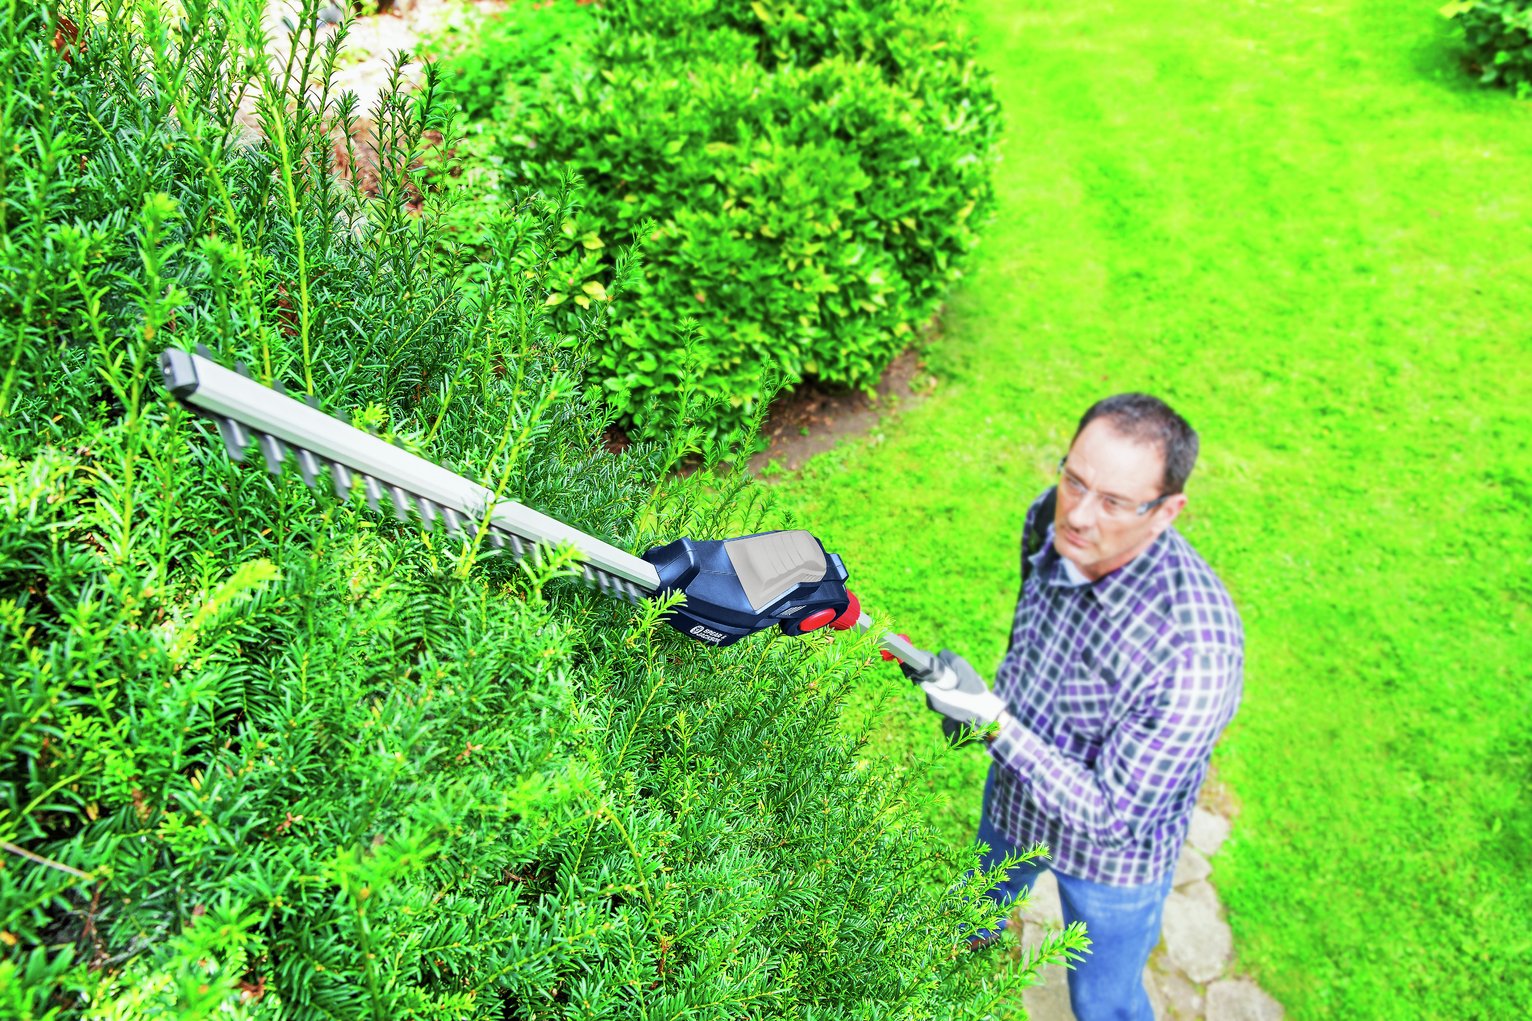 Image of Save 20%: Spear & Jackson 45cm Cordless Pole Hedge Trimmer